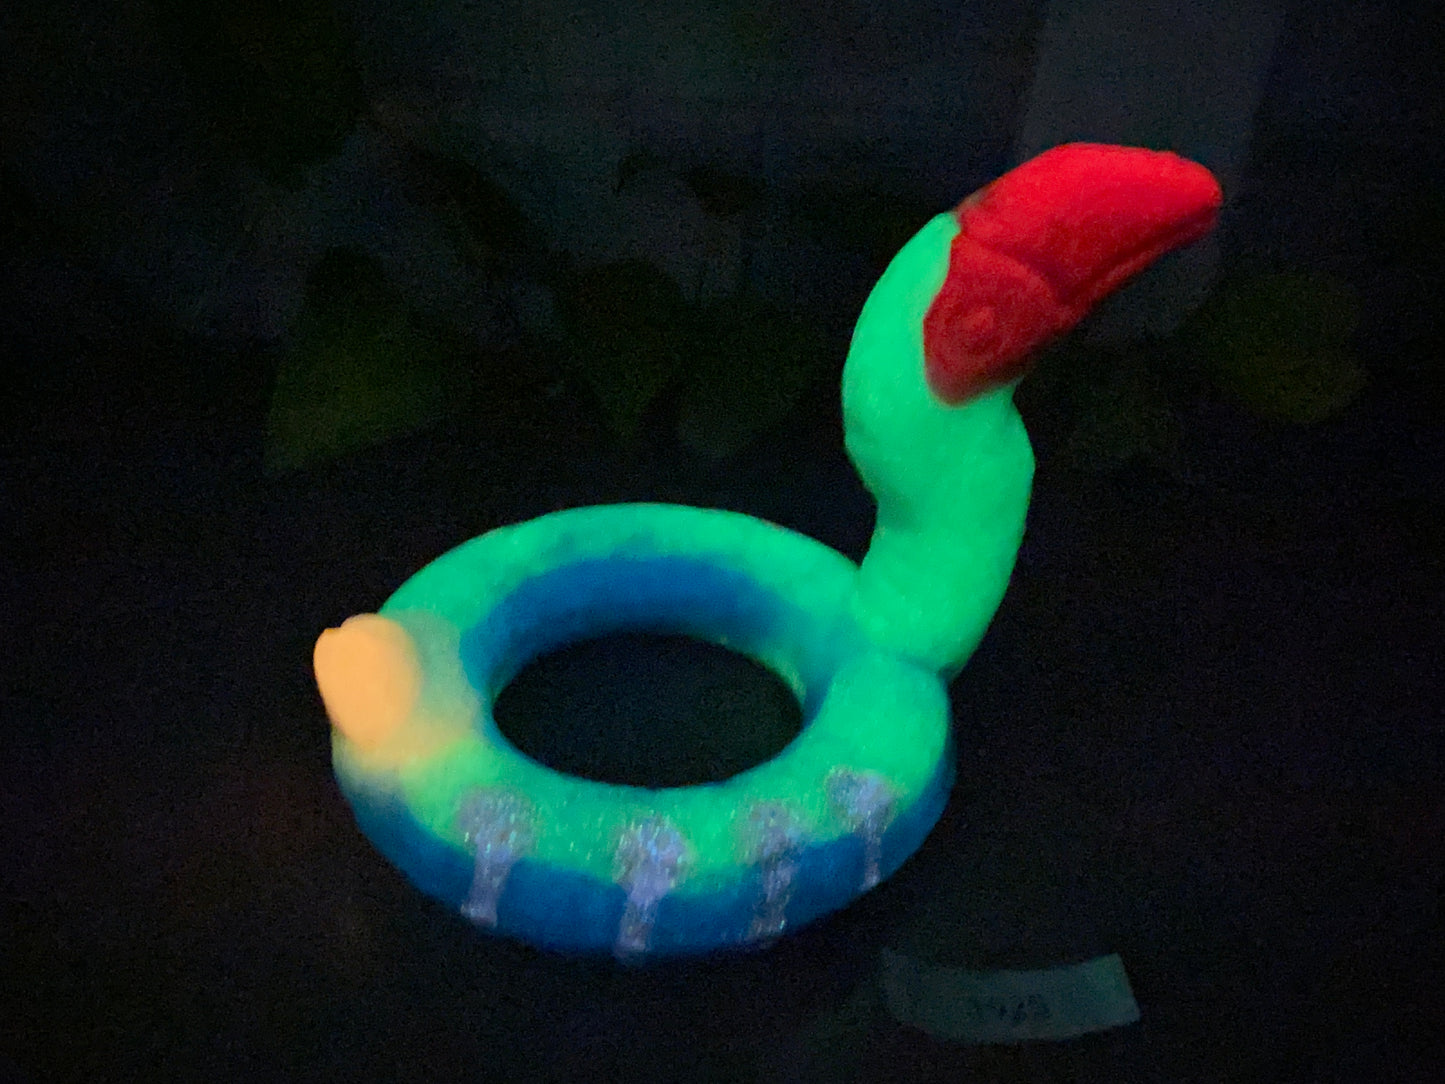 a green and blue ring with a red hat on it